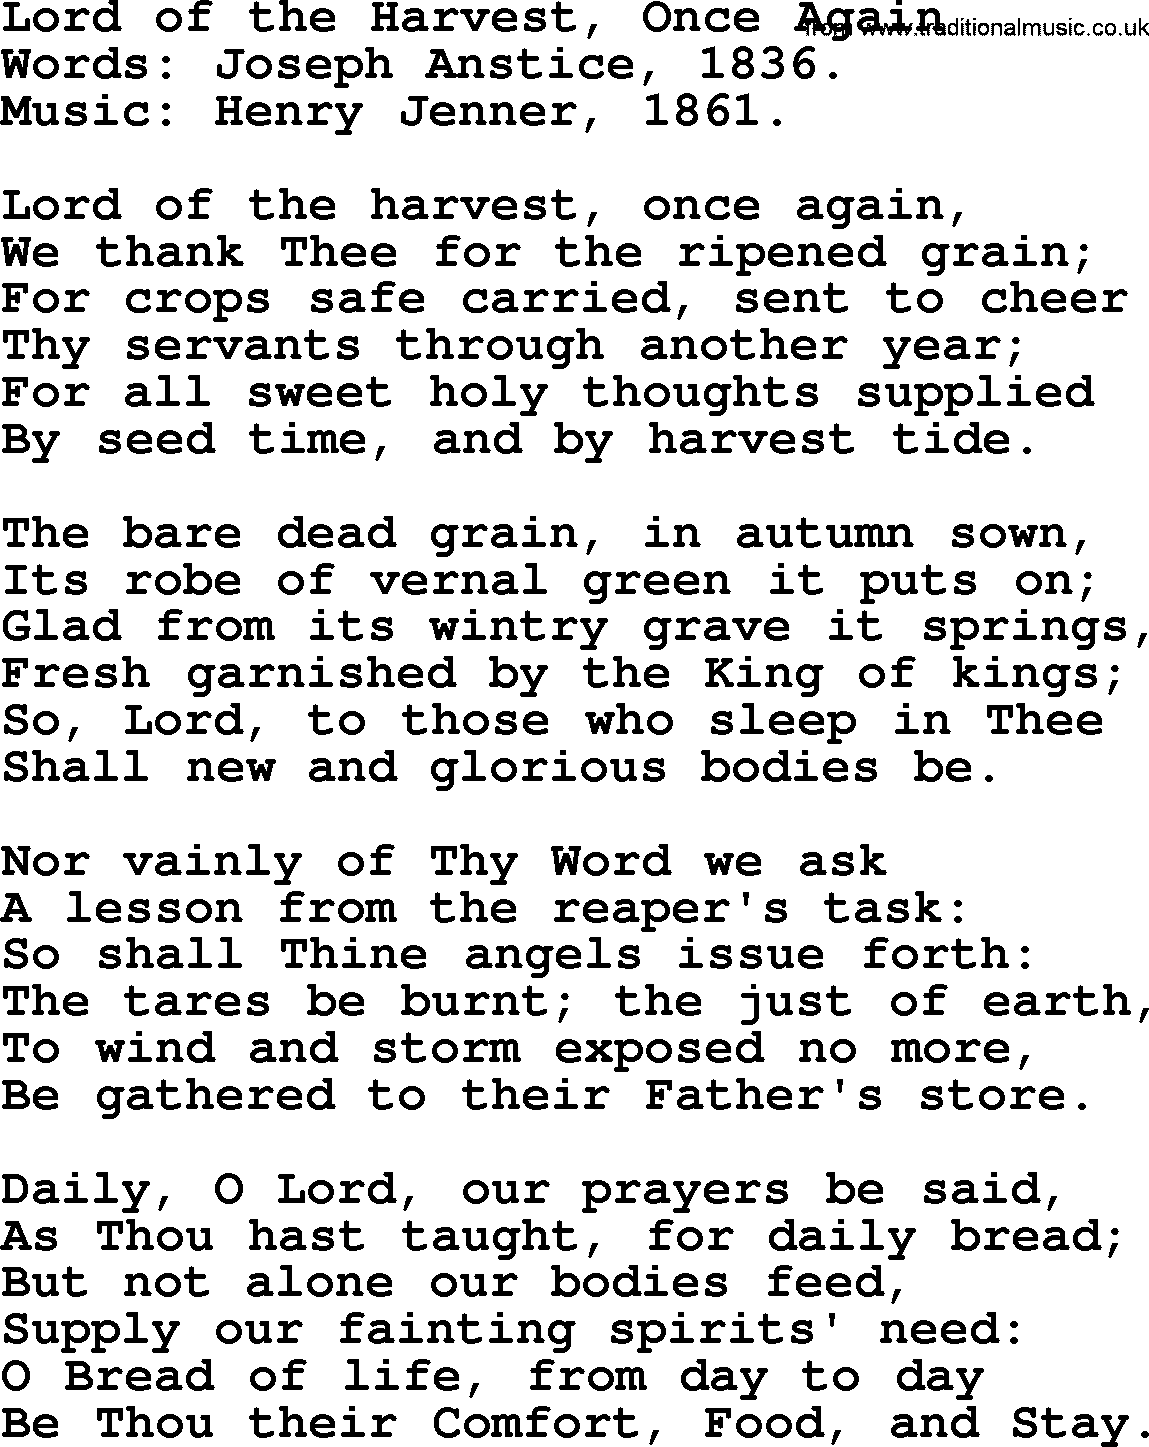 100+ Christian Funeral Hymns collection, Hymn: Lord of the Harvest, Once Again, lyrics and PDF